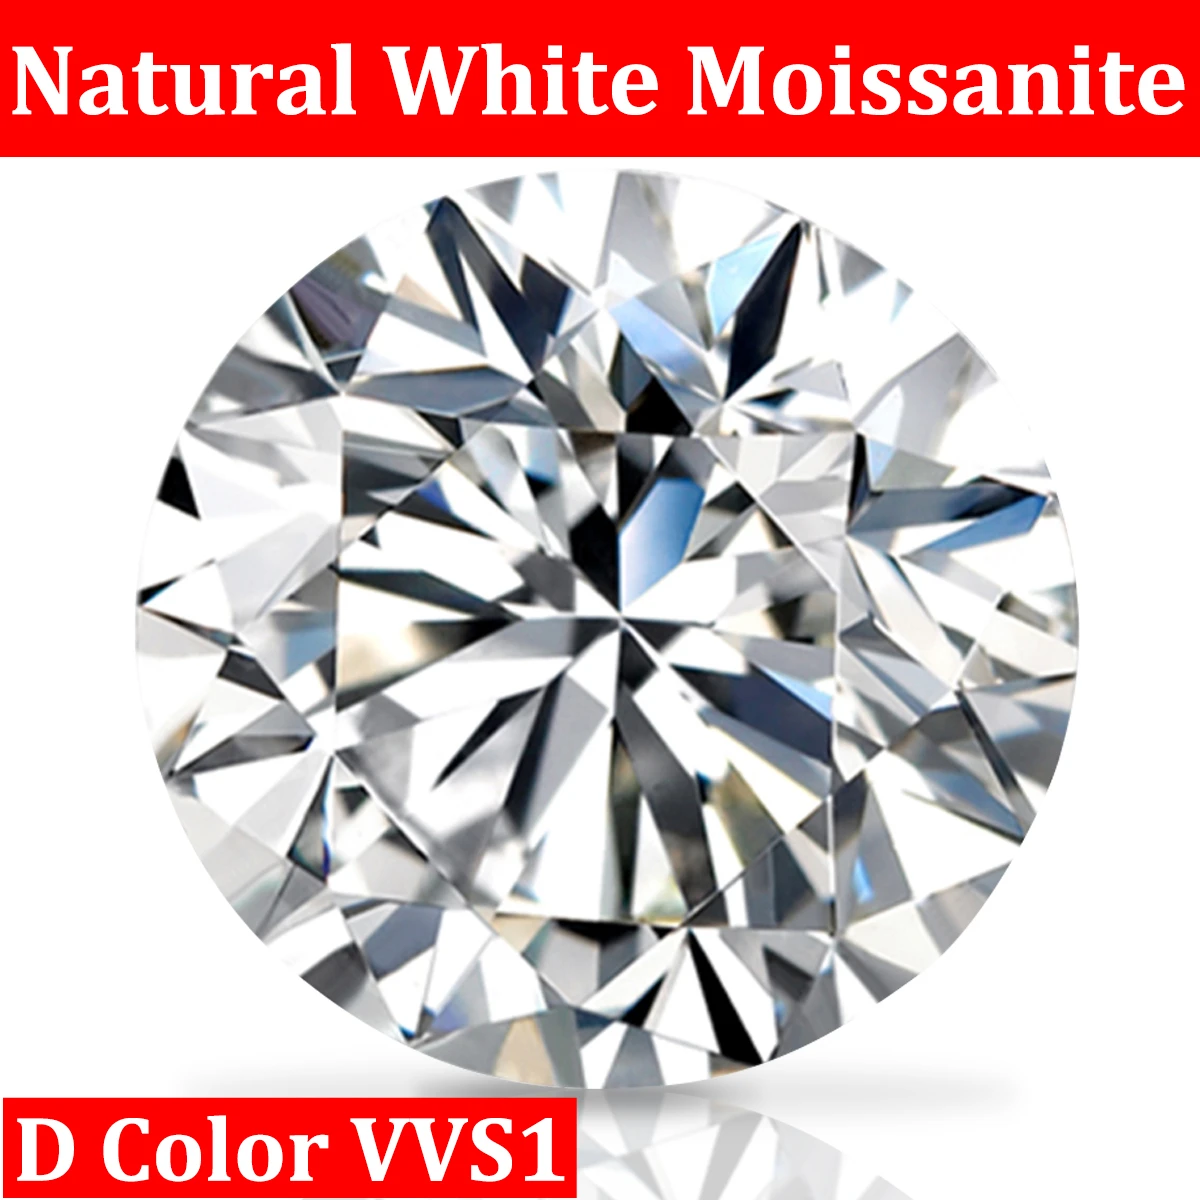 Loose Gemstones Moissanite Stones 3mm To 12mm D Color VVS1 Top Selling Round Shape Diamond Excellent Cut Pass Diamond Tester Hot